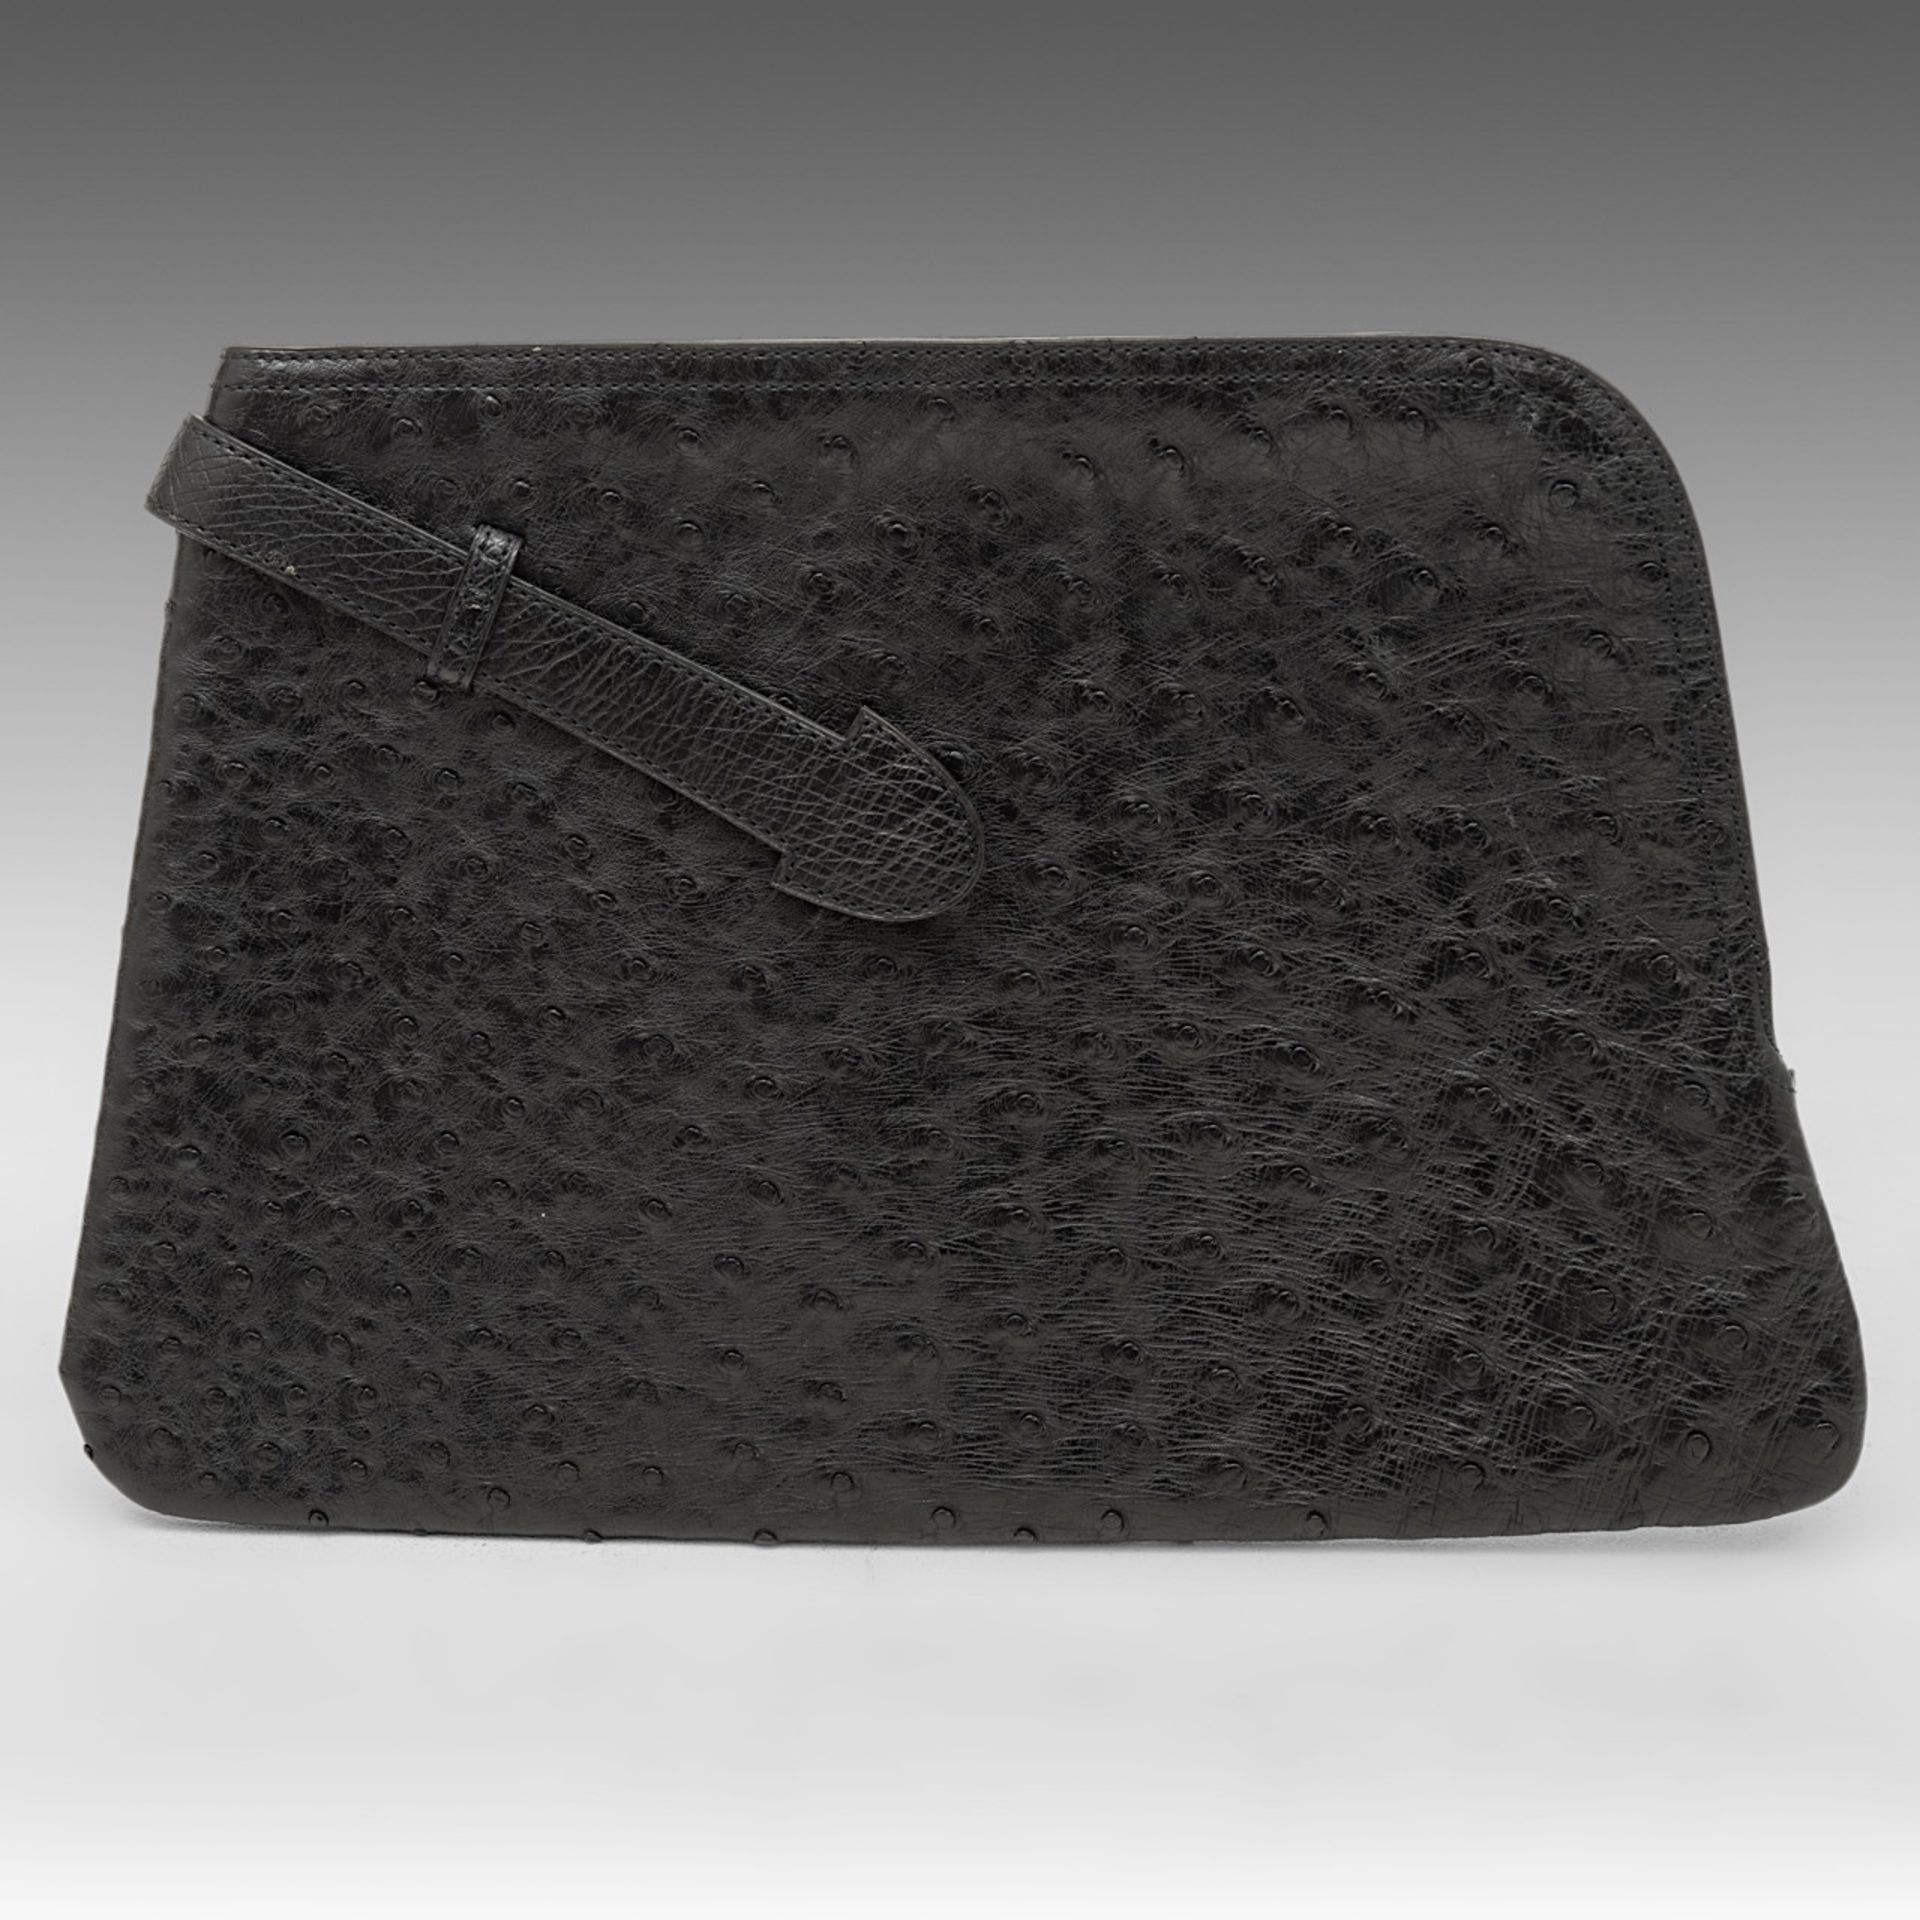 A matching collection of a Delvaux shoulder bag, a clutch and a wallet in black ostrich leather. - Image 7 of 16